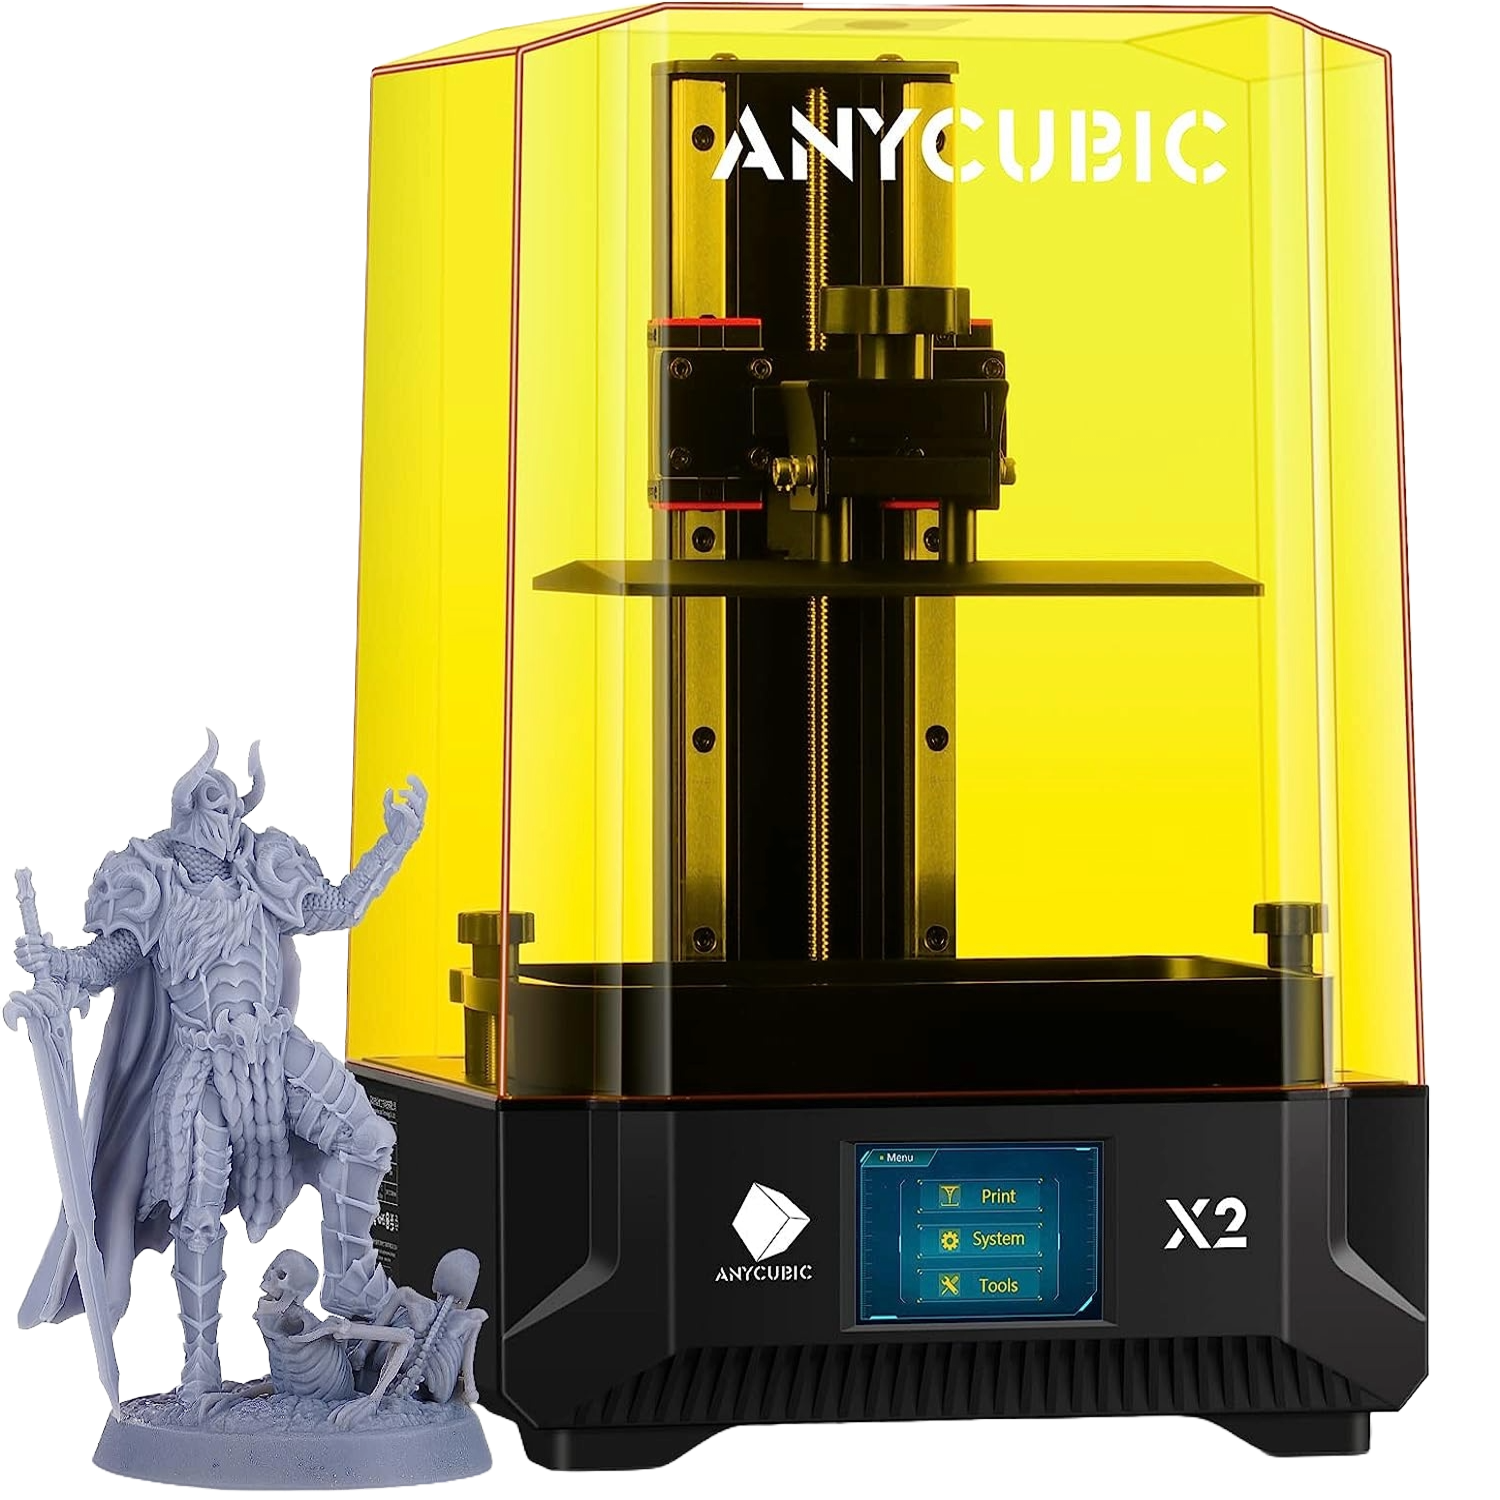 A PNG render of the Anycubic Photon Mono x2 resin printer with a demo print next to it on a transparent background